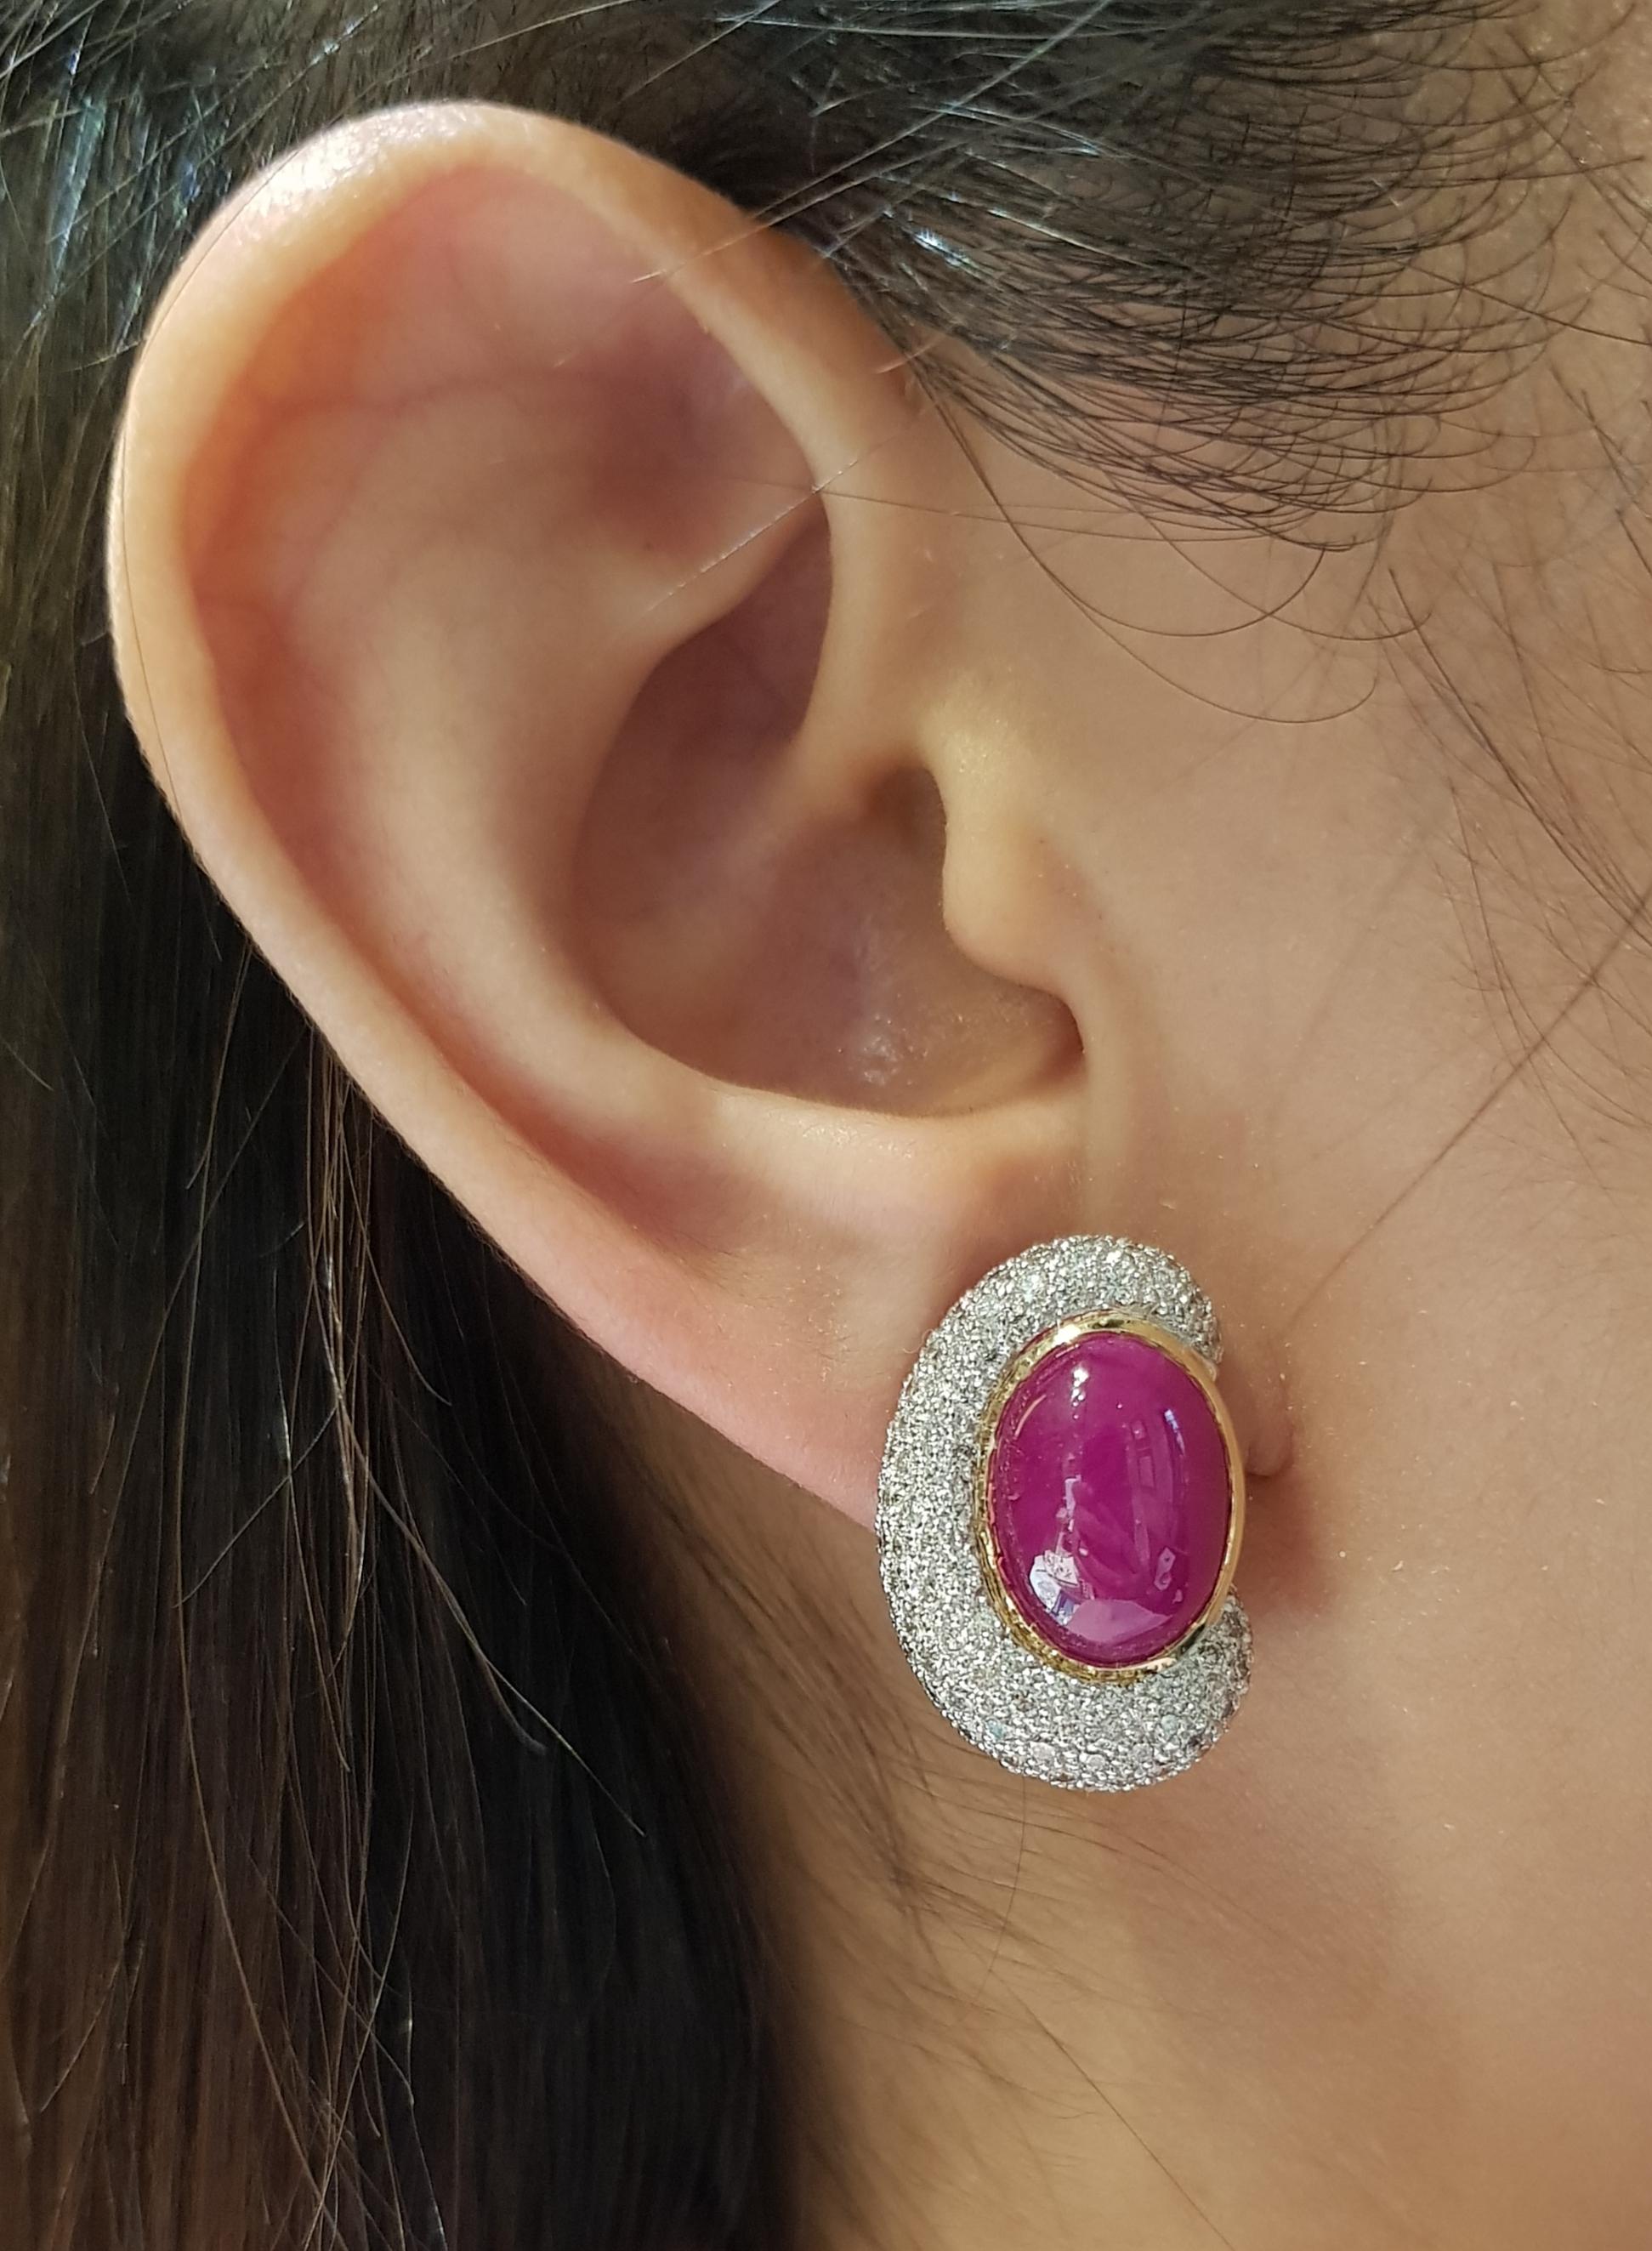 Cabochon Ruby 14.76 carats with Diamond 4.09 carats Earrings set in 18 Karat Gold Settings

Width:  1.5 cm 
Length:  2.3 cm
Total Weight: 19.17 grams

